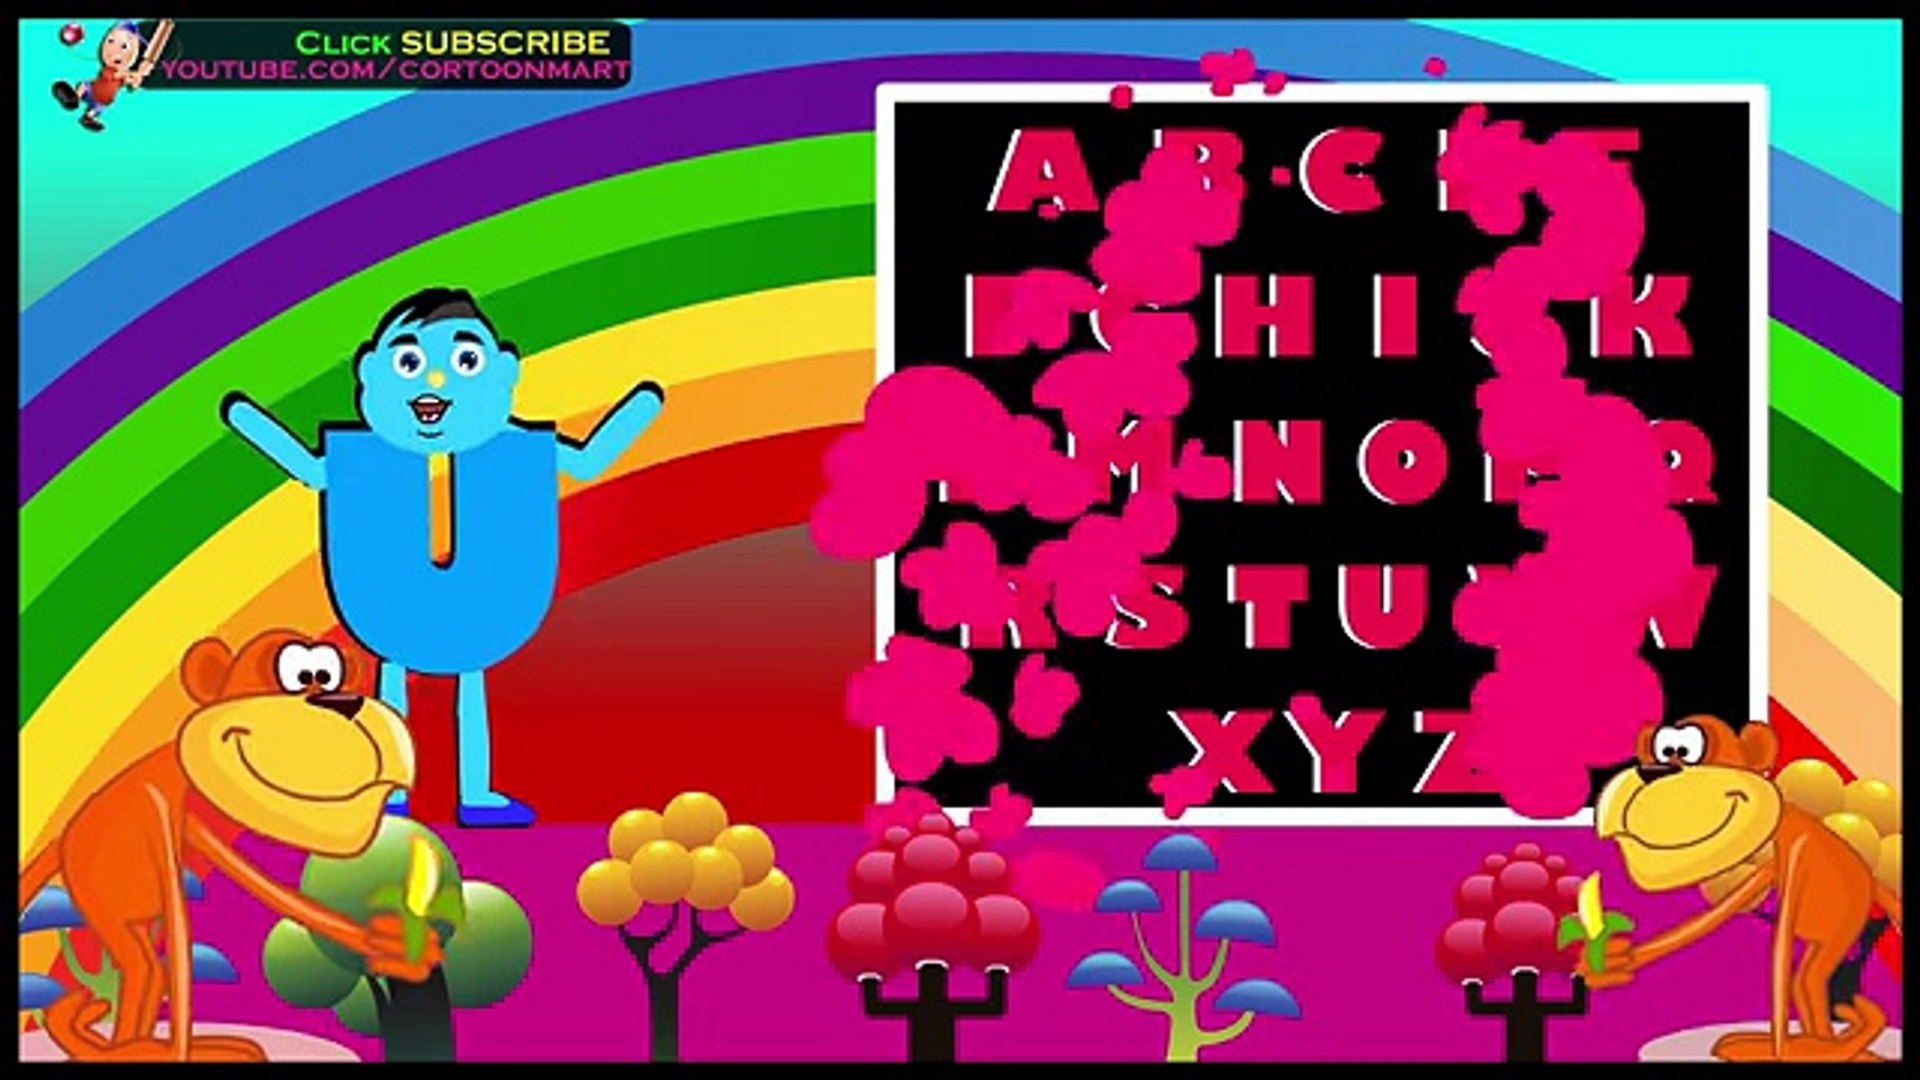 Phonics Song ABCD Cartoon Animation For Kids Nursery Rhymes Cortoonmart -  video Dailymotion